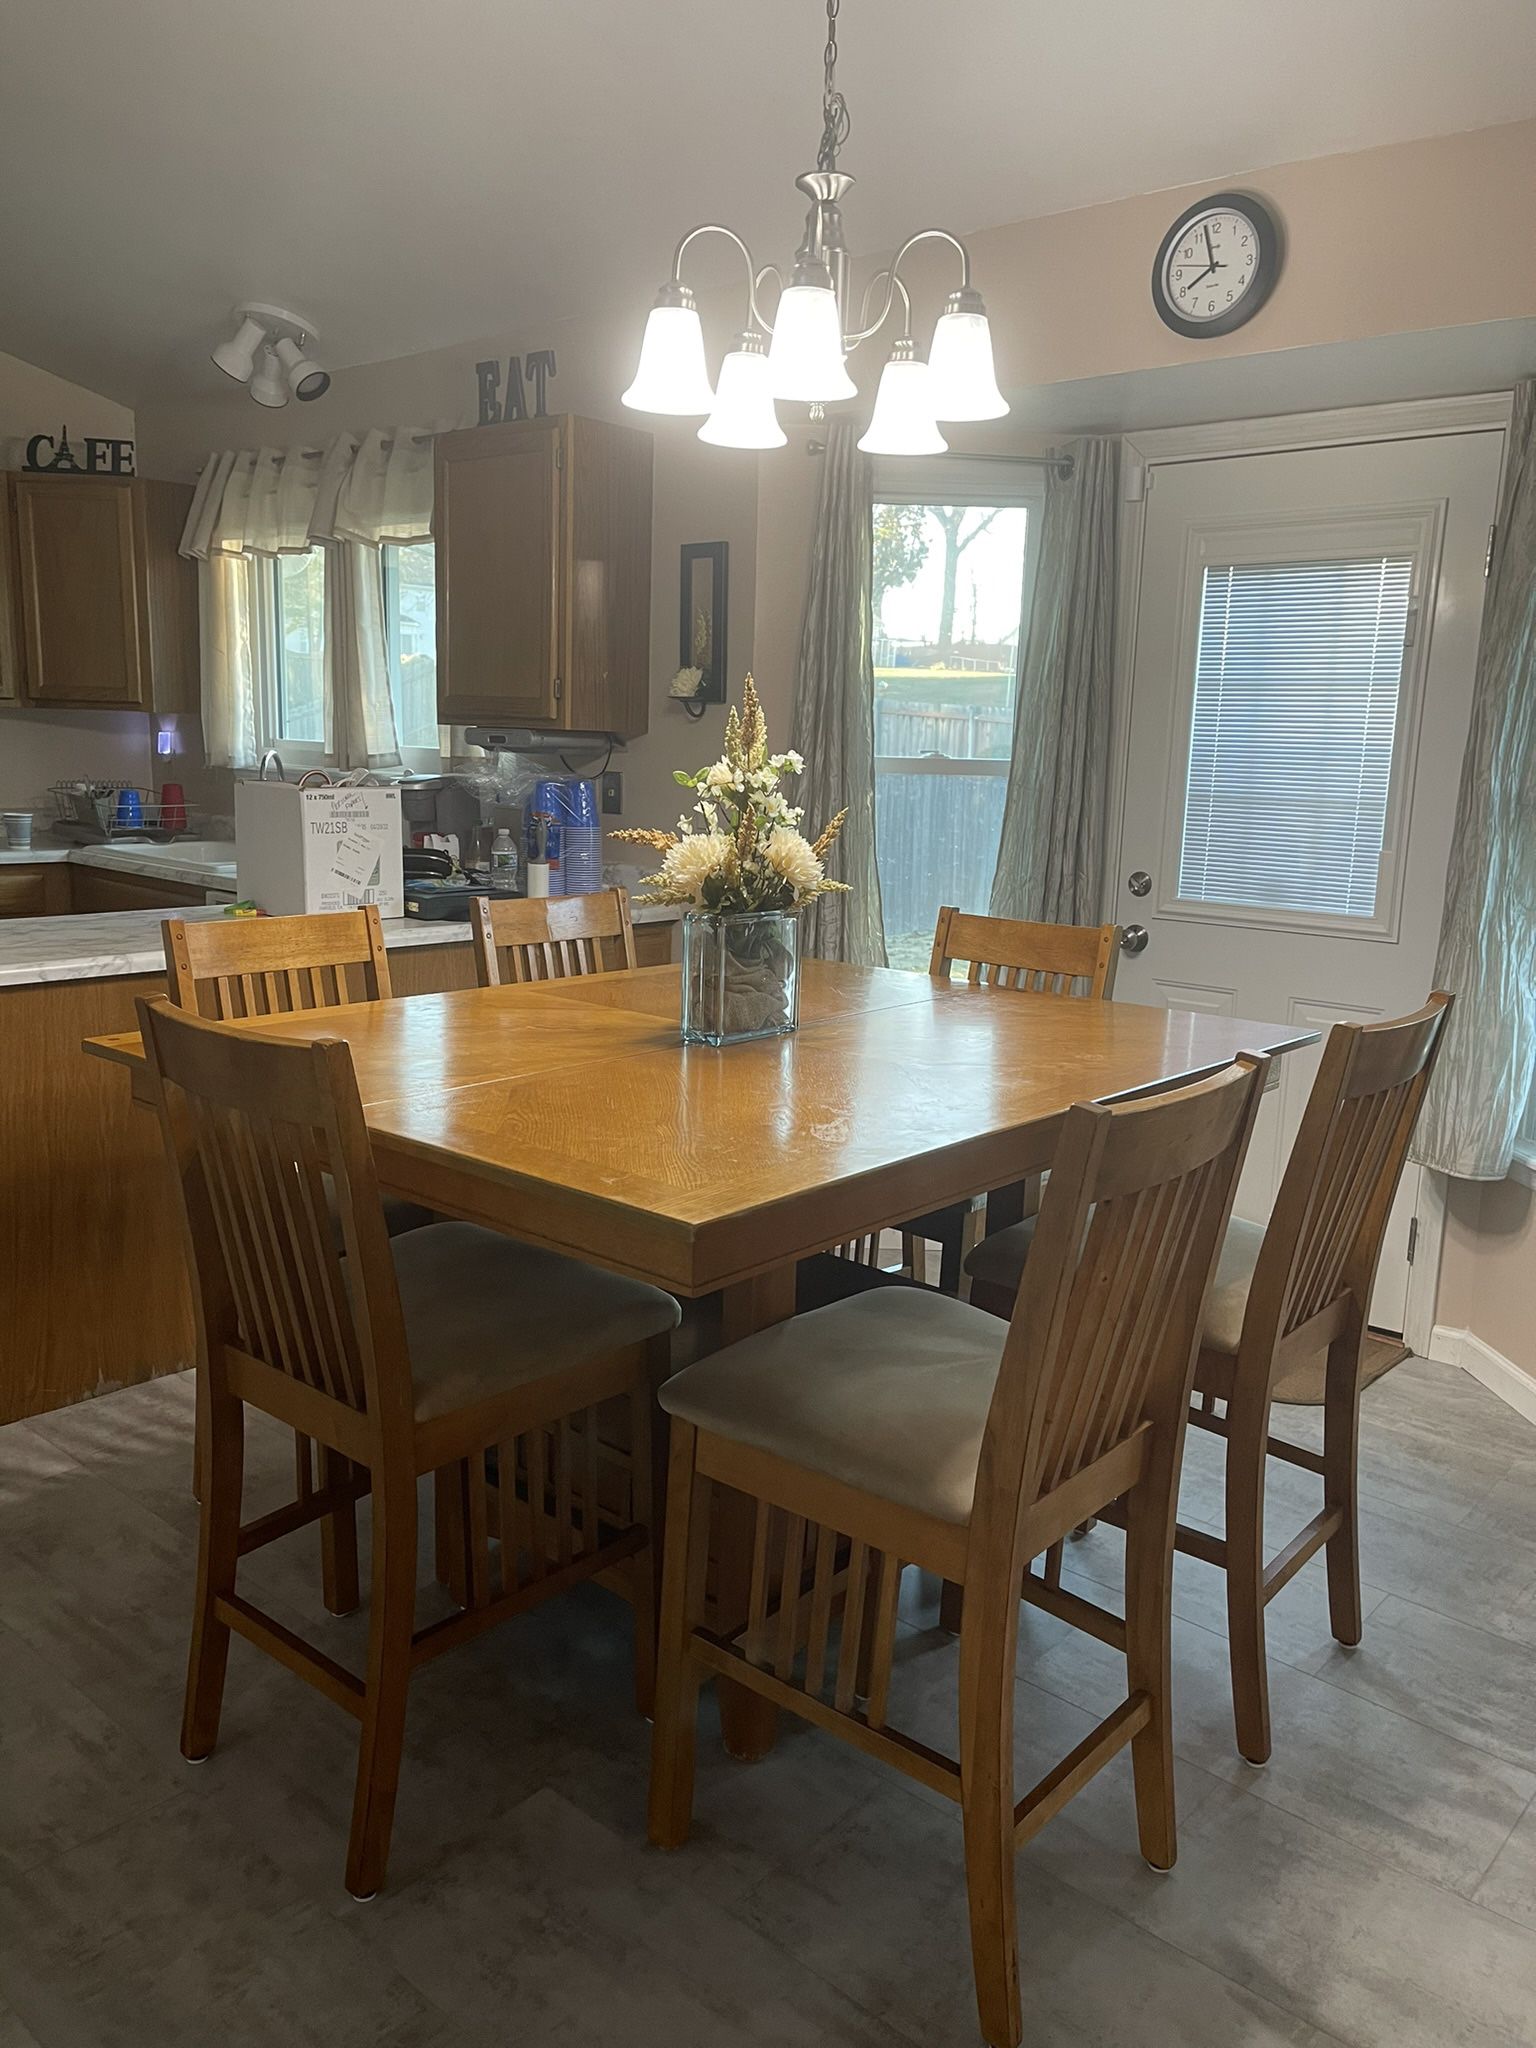 Counter Height Kitchen Table